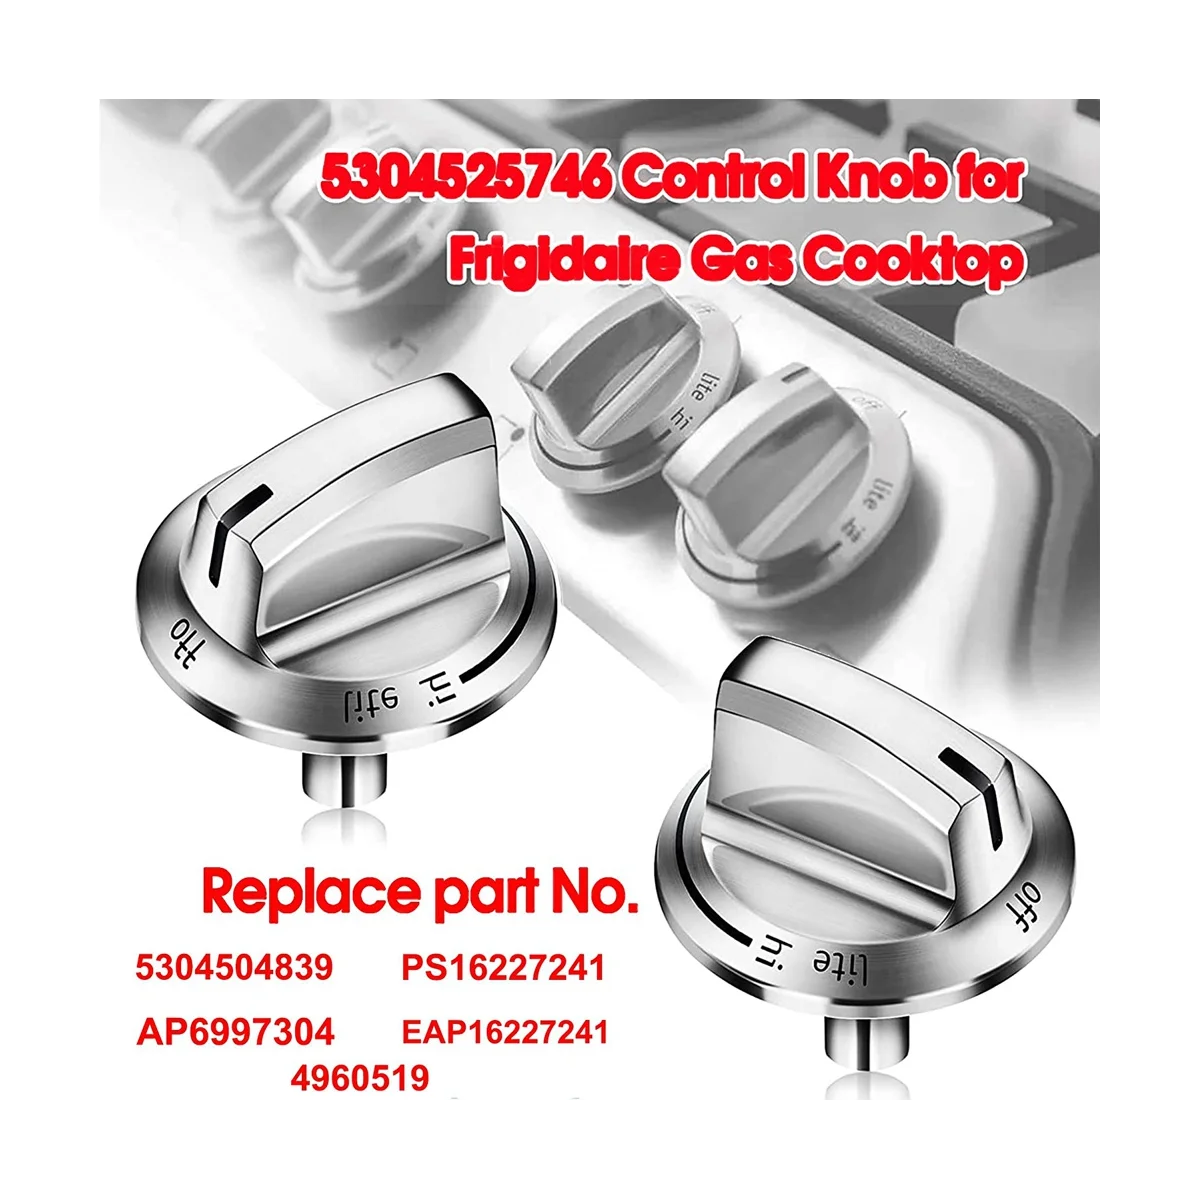 5304525746 Gas Stove Knobs for Frigidaire 5304504839 Stove Knob Gas Range Knobs,Gas Stove Parts, Replace Control Knob-1